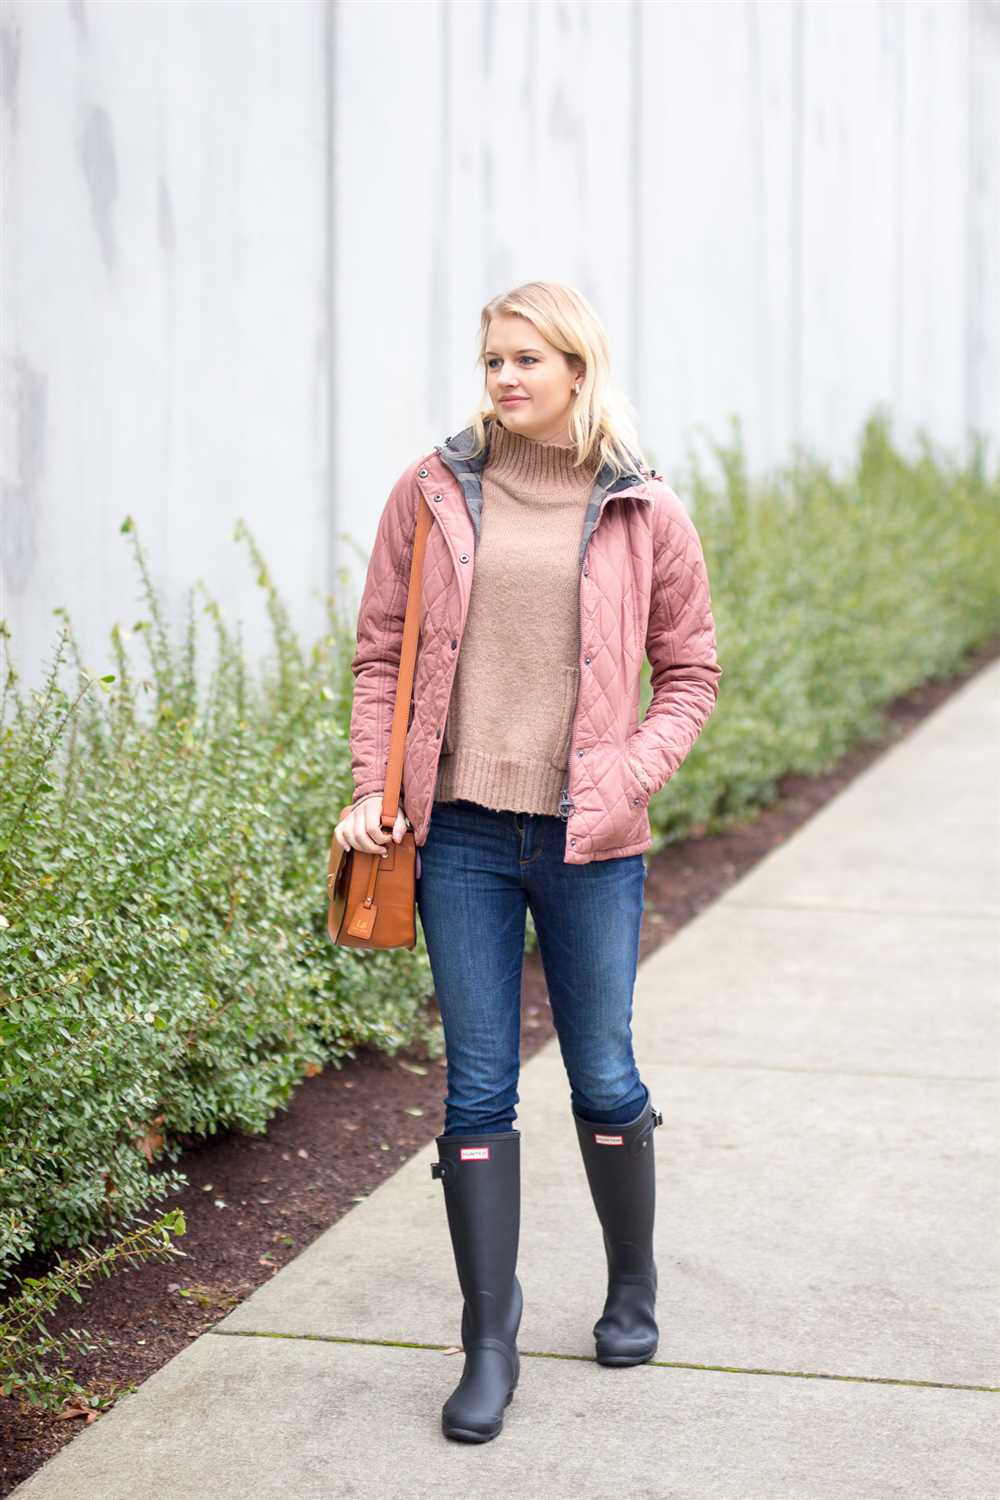 How to wear hunter boots